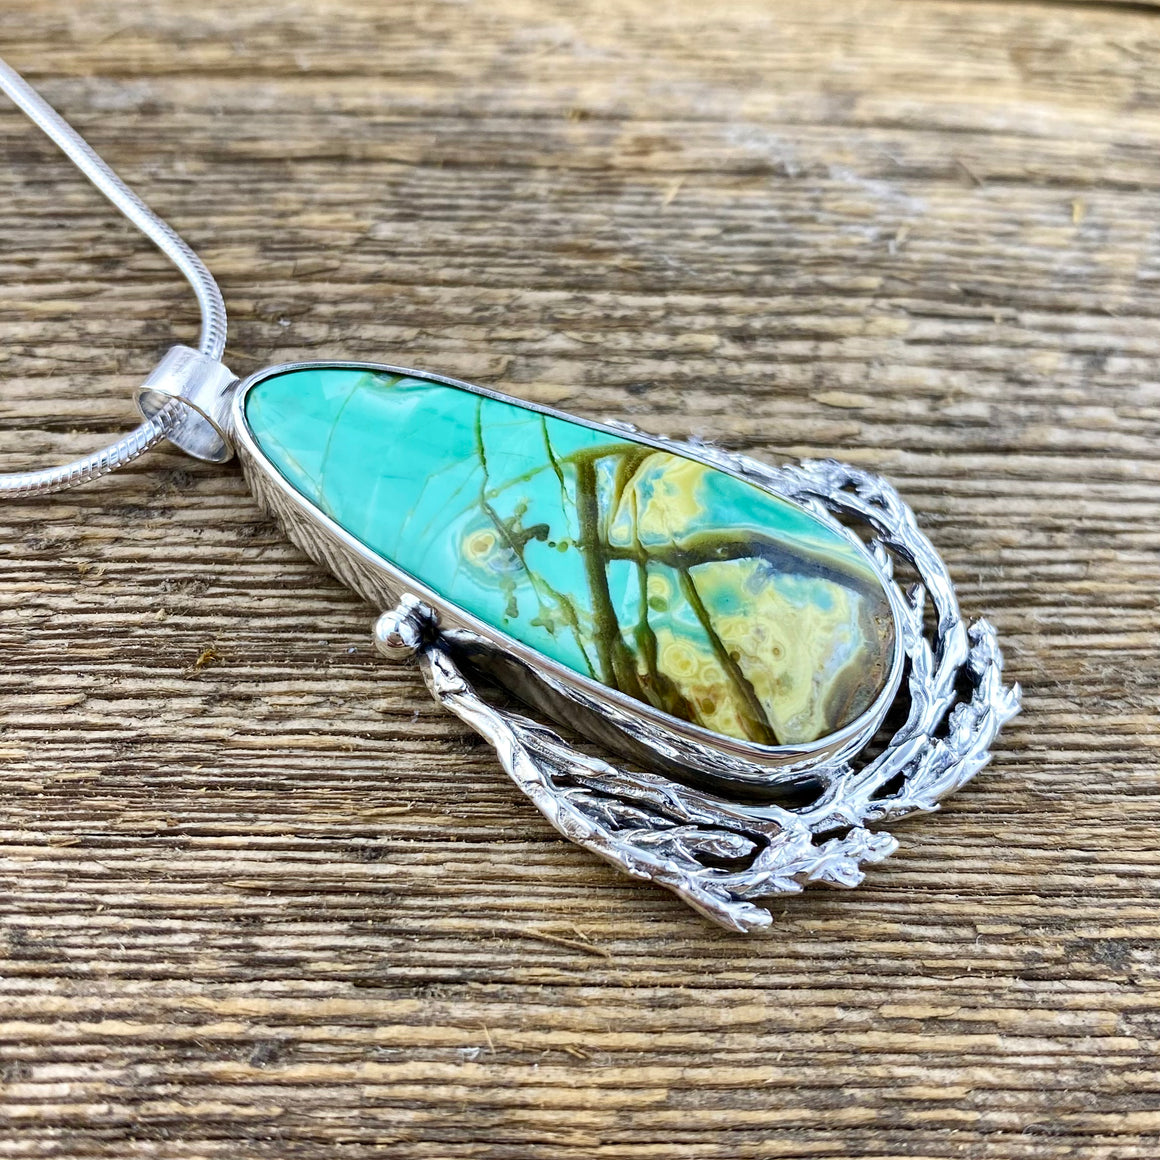 Vitality Gorgeous and Rare Clay Canyon Variscite Pendant